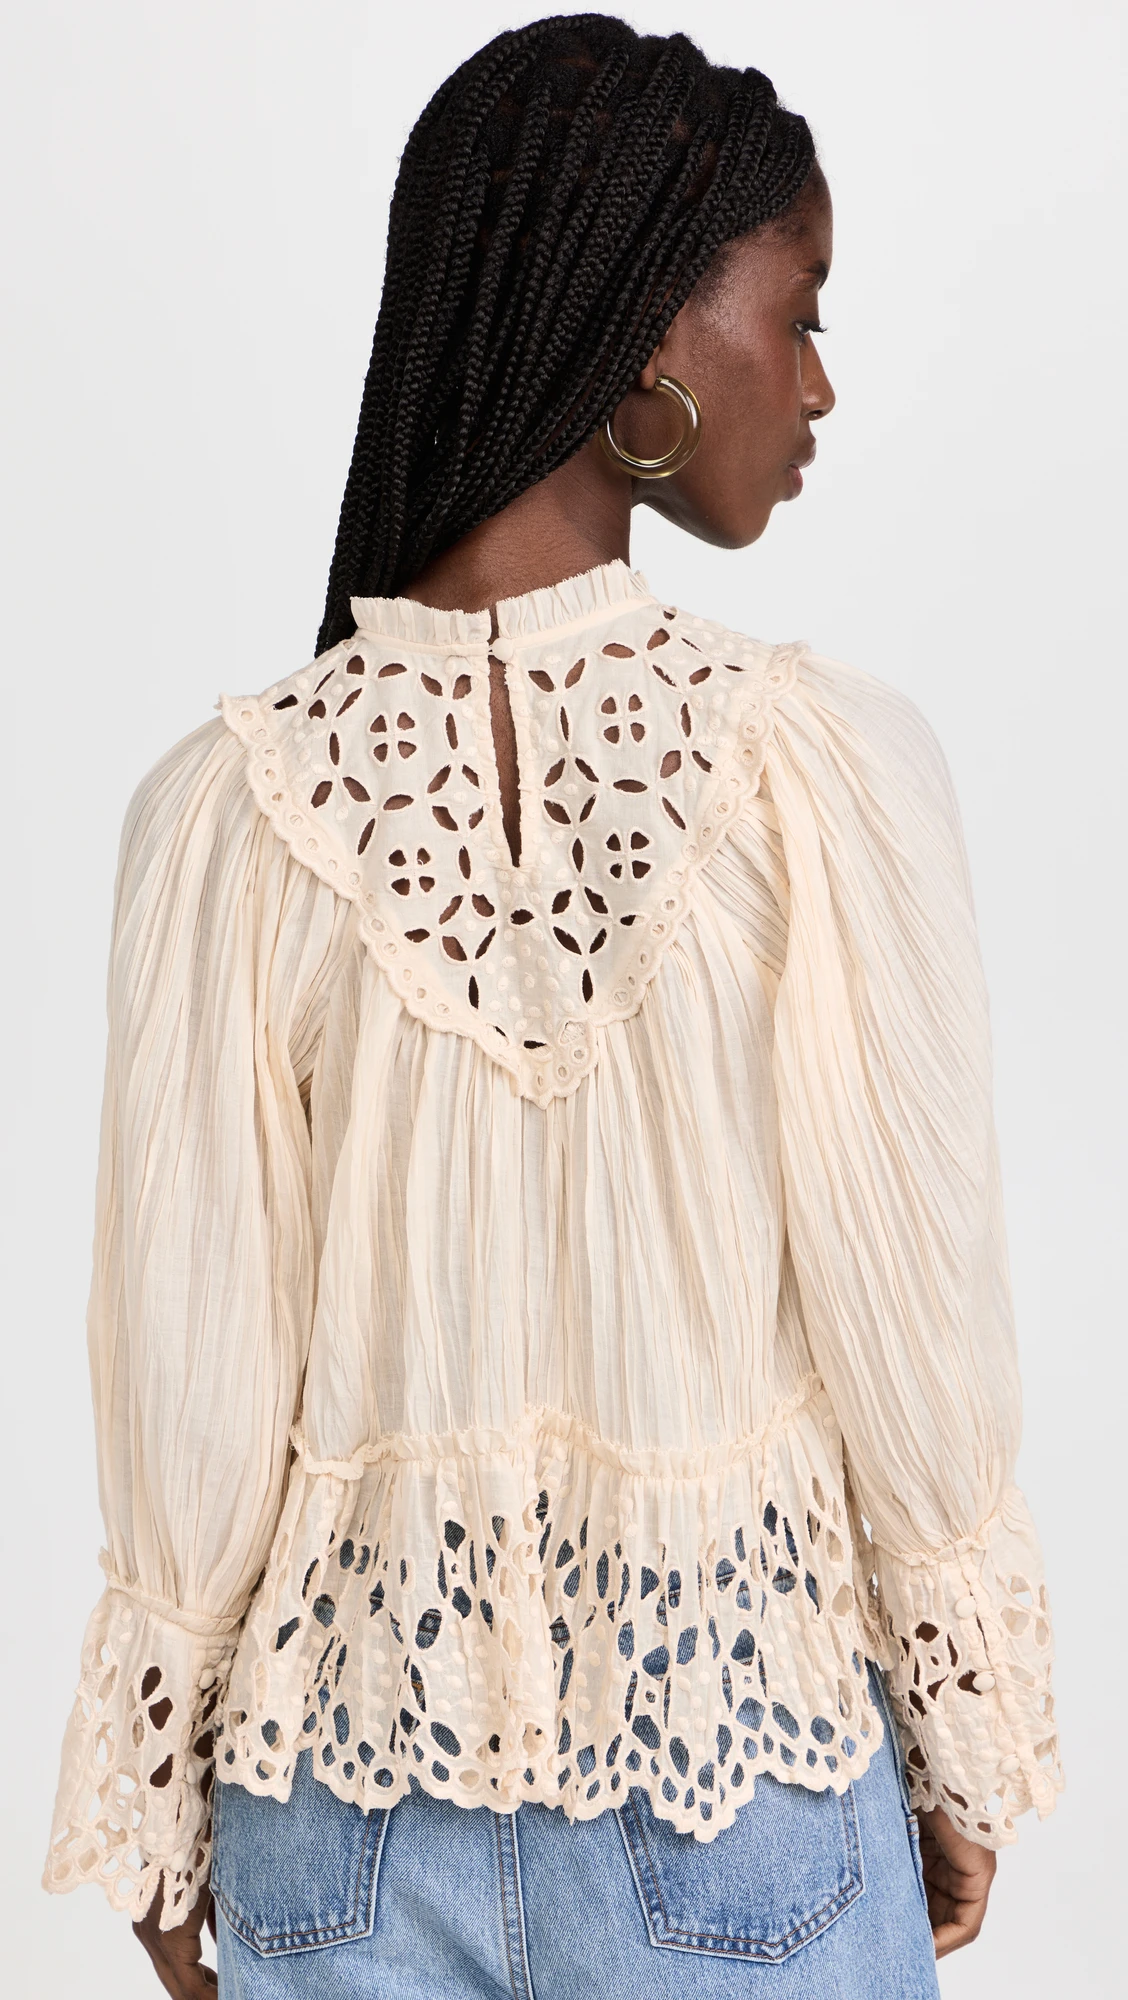 Textured stitching lace cut lace pleated shirt top